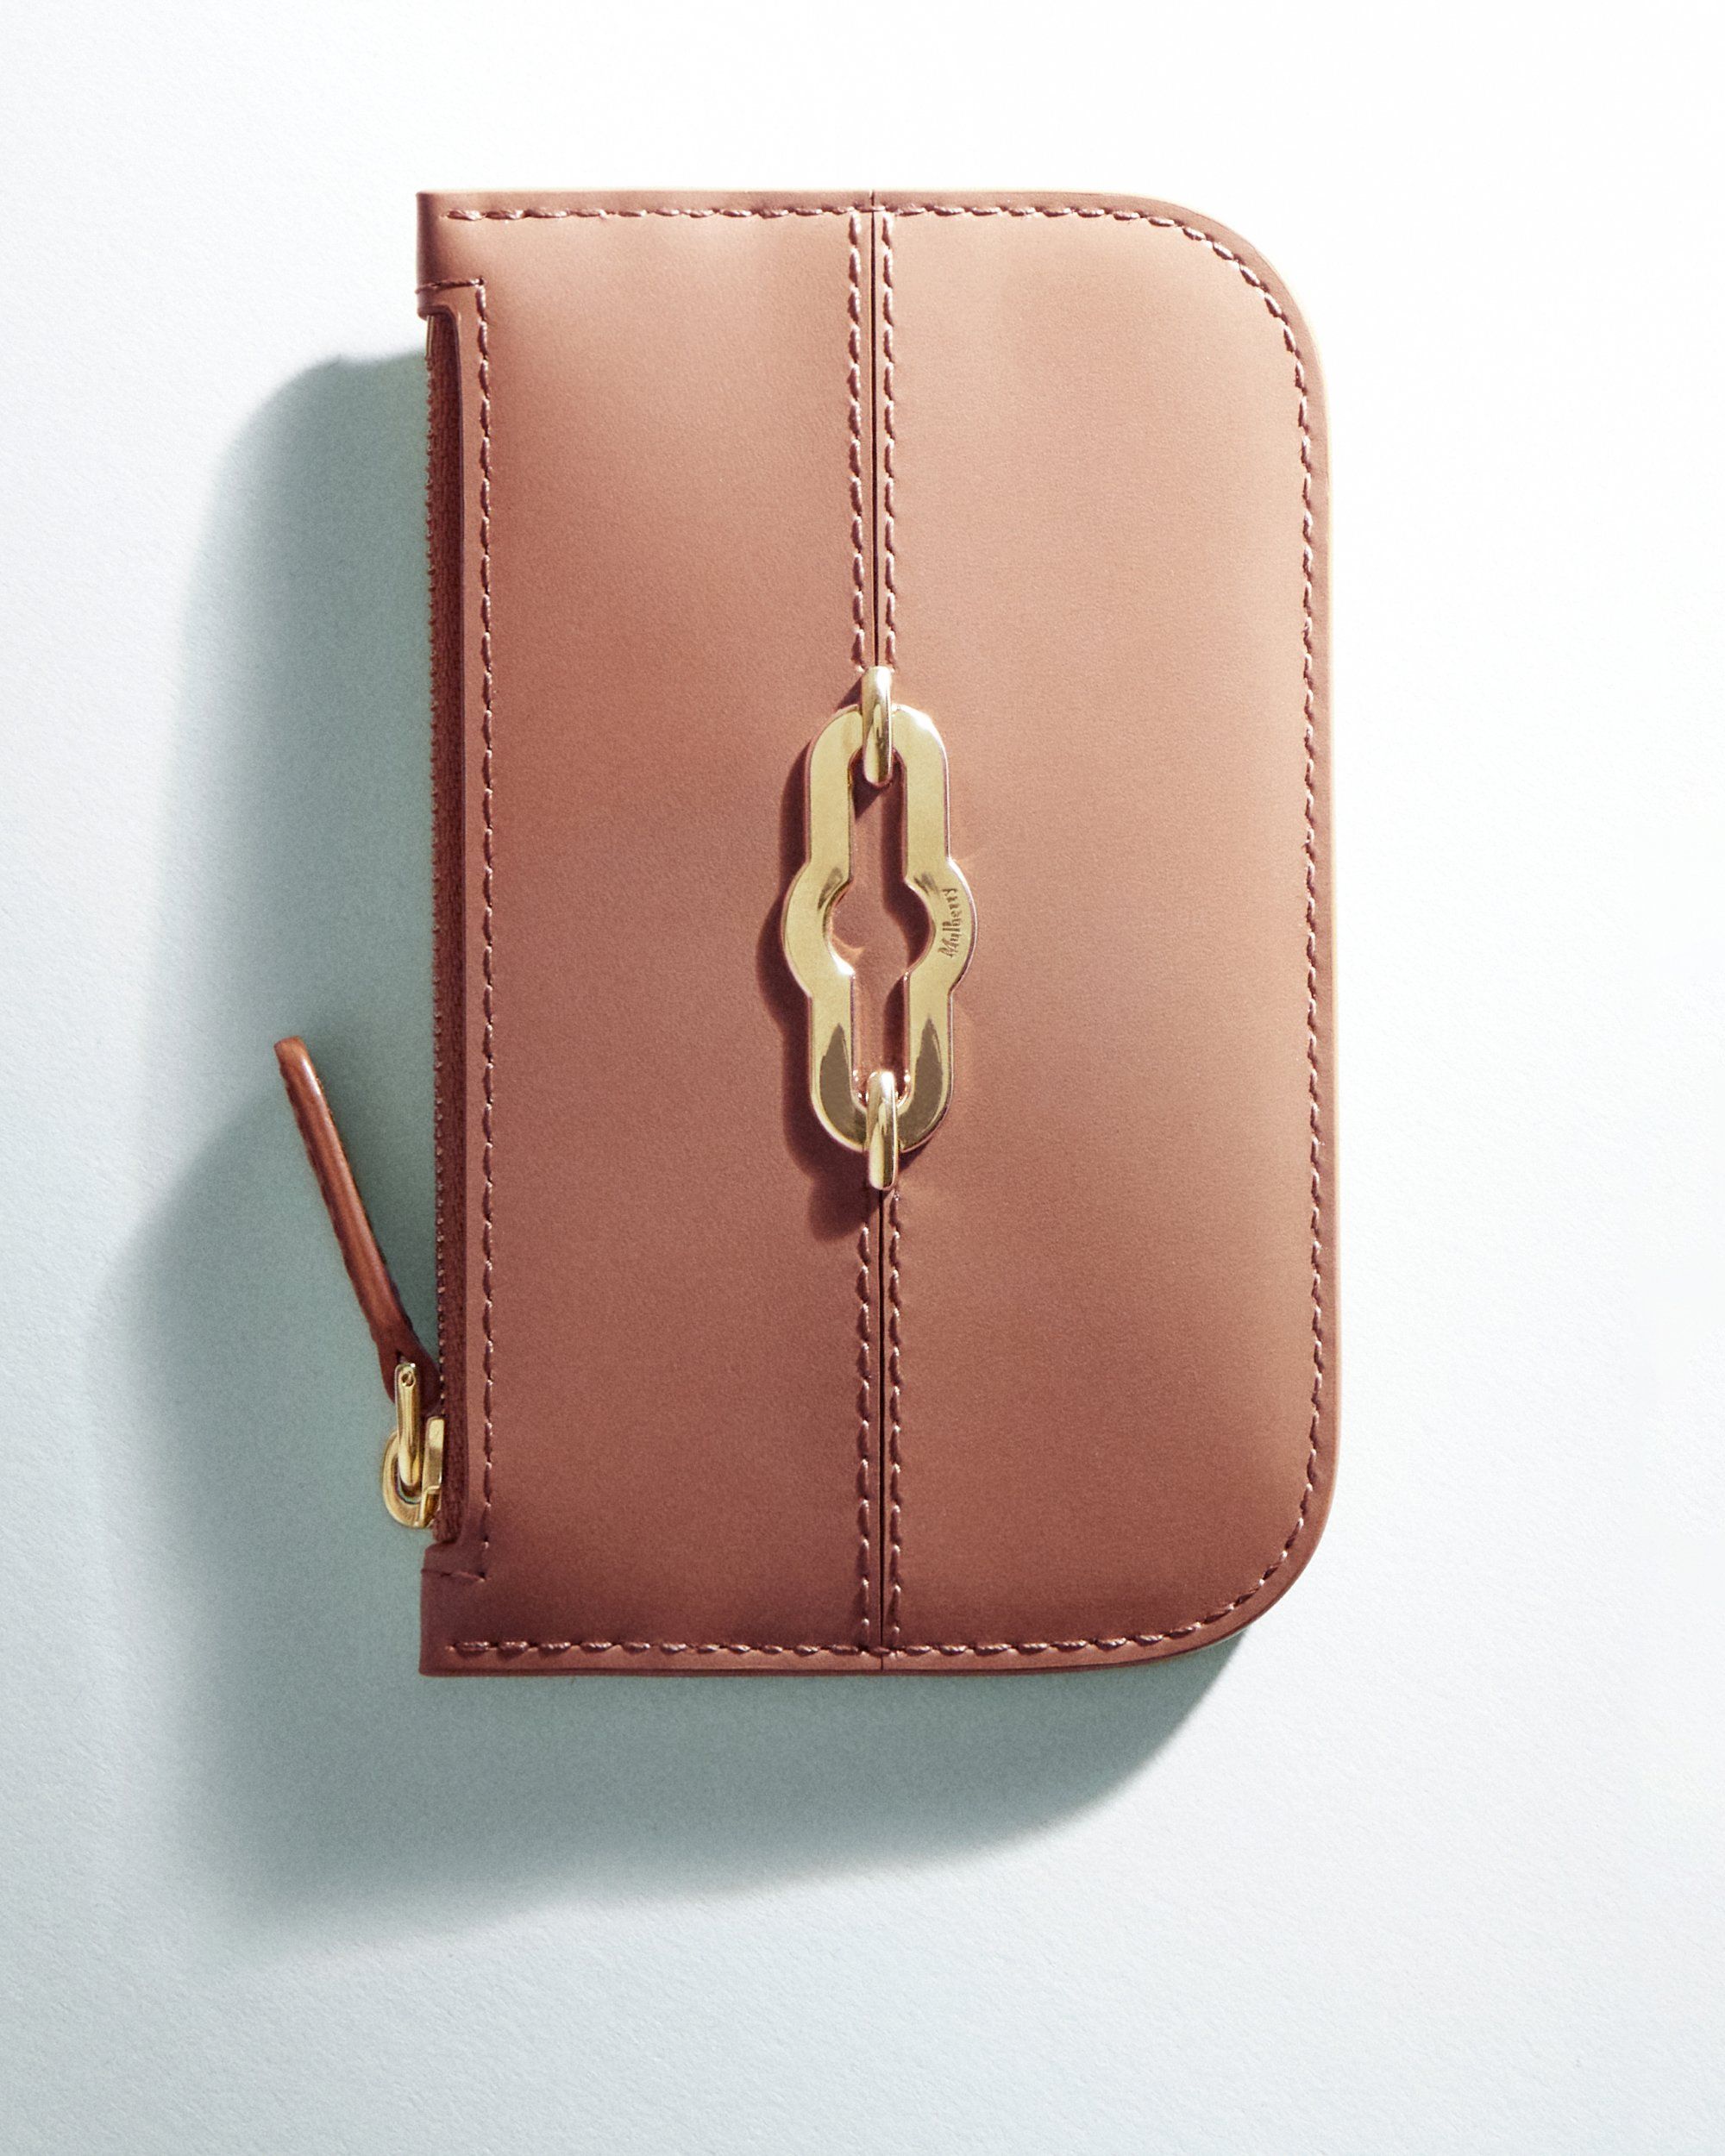 Mulberry Pimlico Zipped Wallet in beige leather